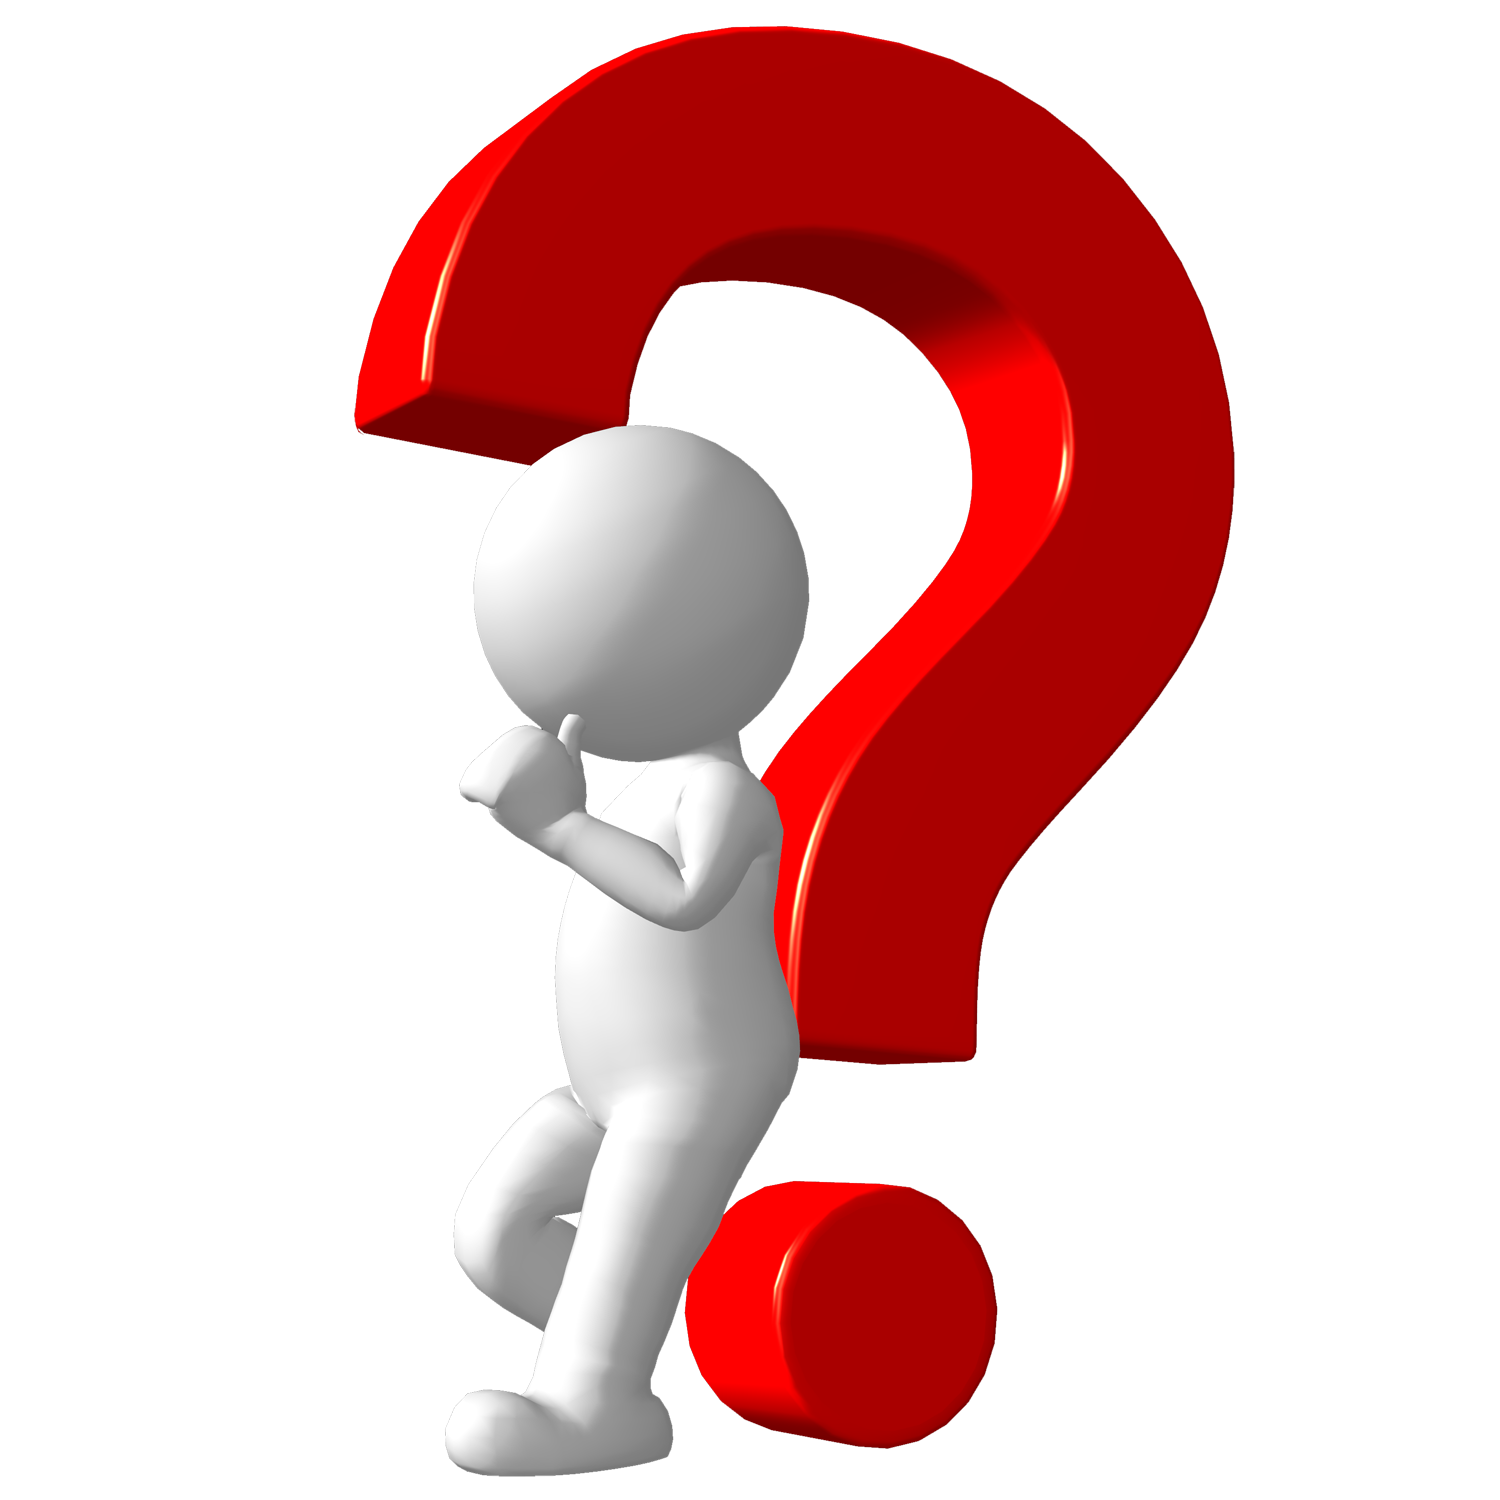 Question mark pictures of questions marks clipart cliparting 8